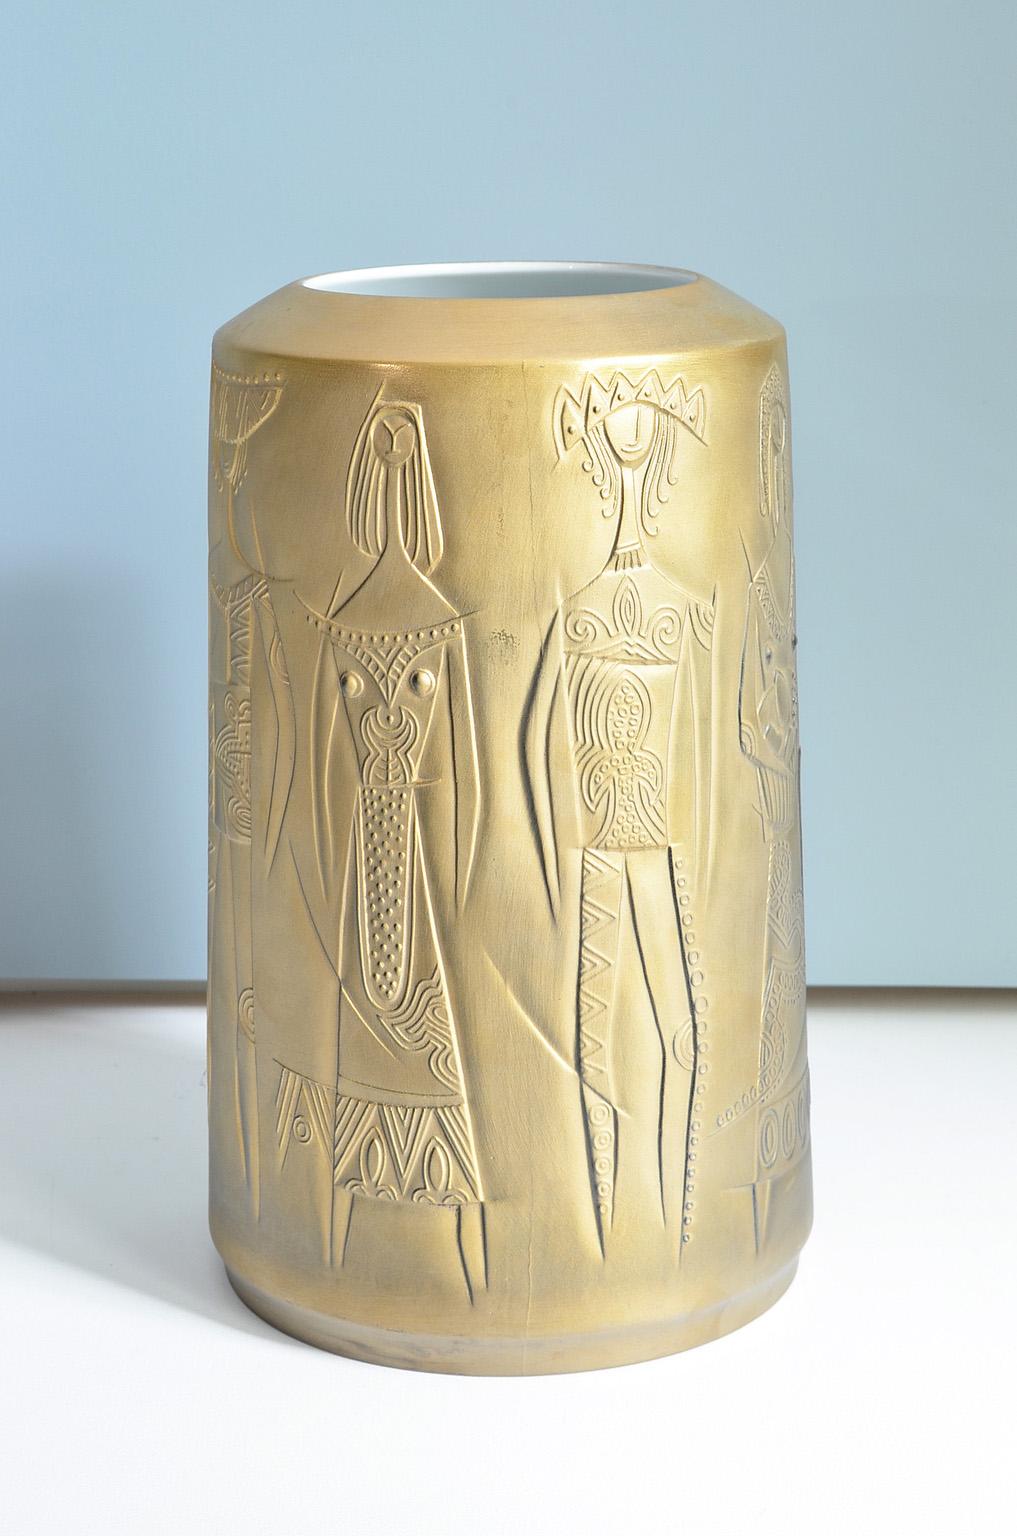 Gold Colored Porcelain Vase by Cuno Fischer for Hutschenreuther, Germany, 1969 In Good Condition For Sale In Nürnberg, Bavaria